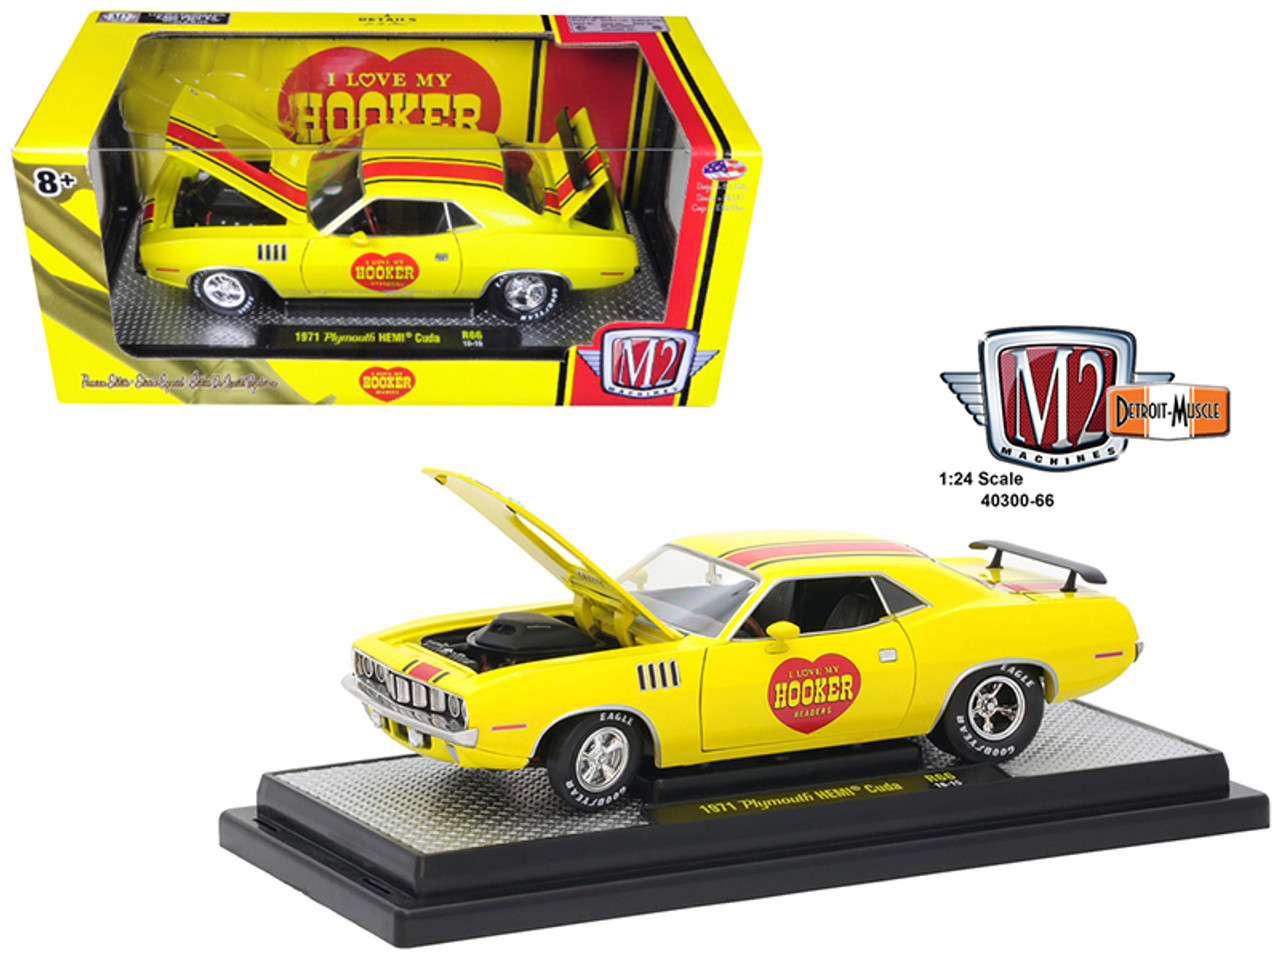 1971 Plymouth Hemi Cuda "Hooker Headers" Yellow Limited Edition to 5800 pieces Worldwide 1/24 Diecast Model Car by M2 Machines